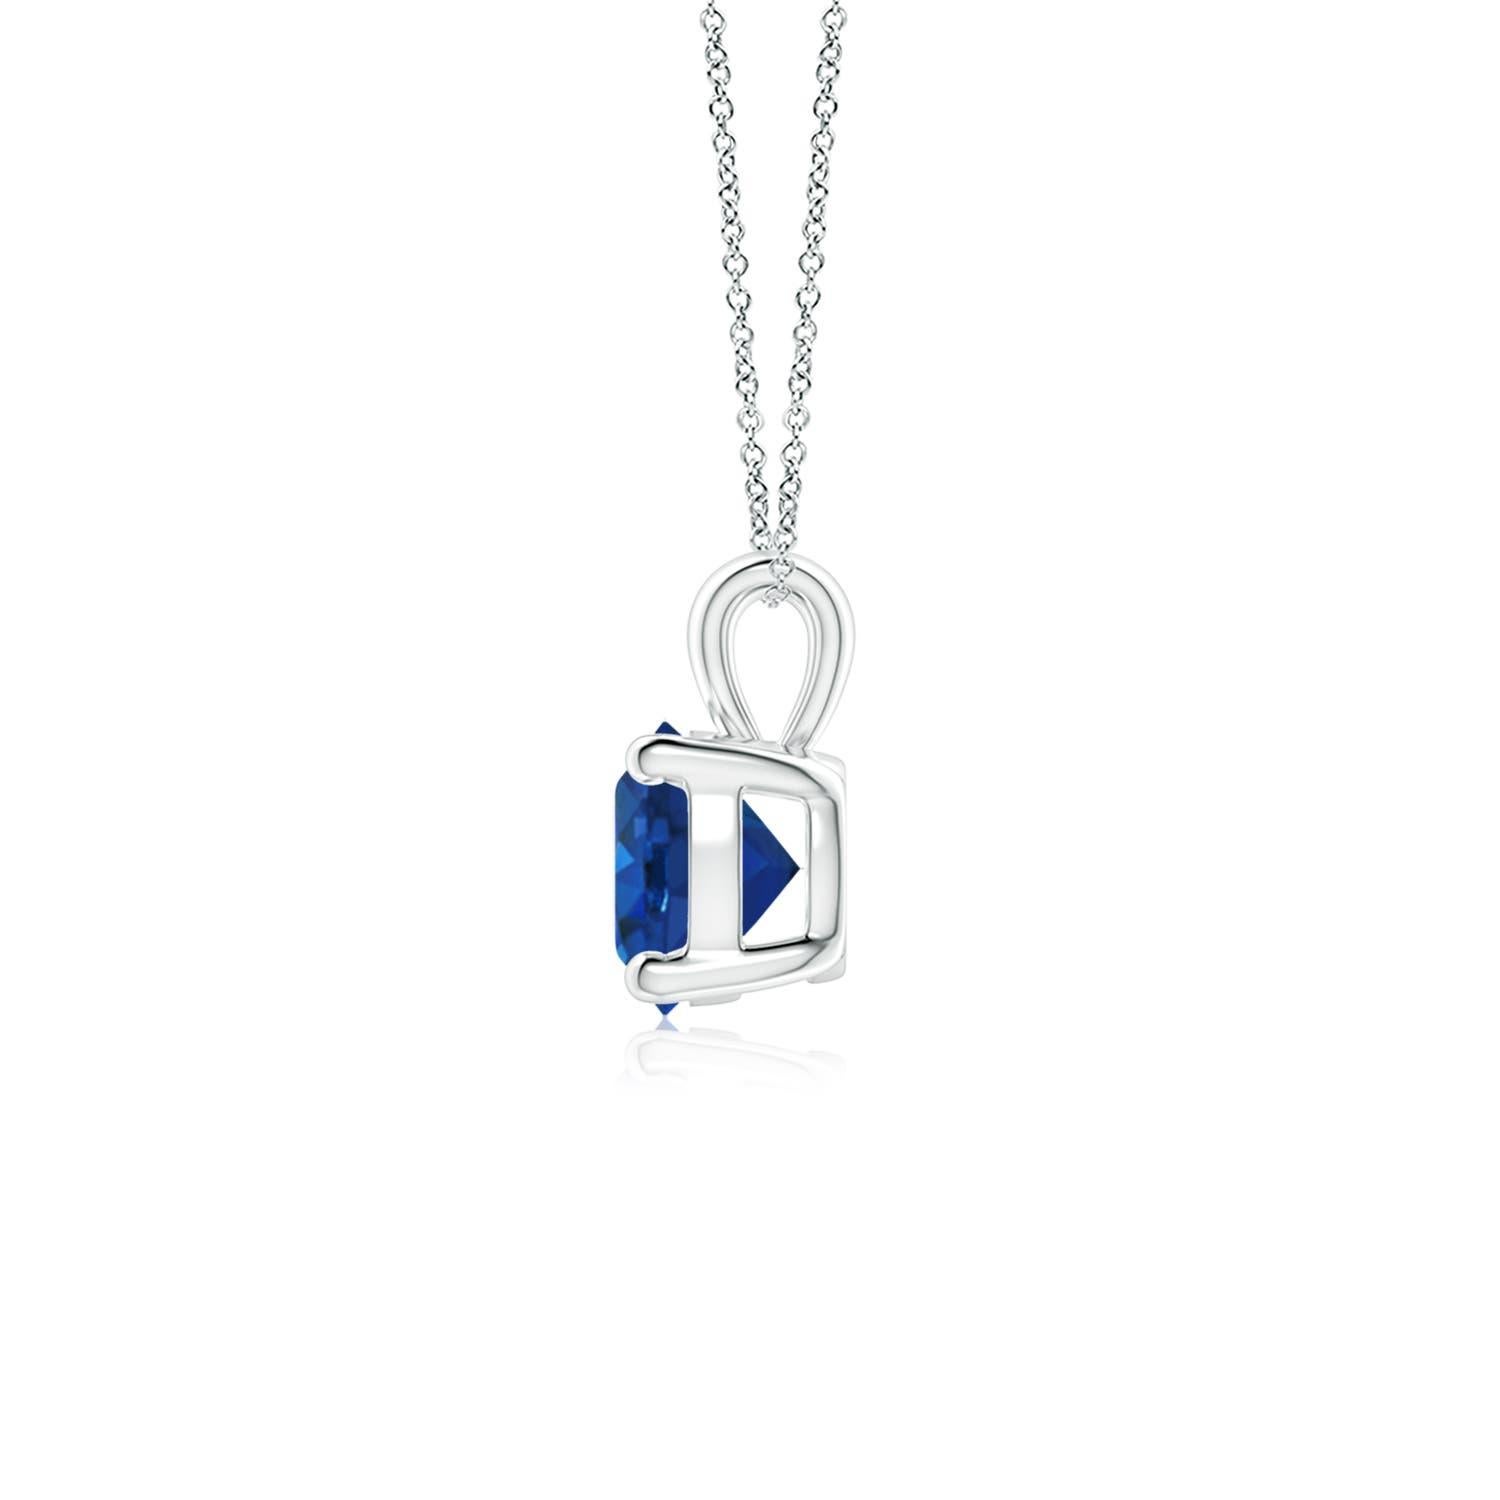 Linked to a lustrous bale is a stunning sapphire solitaire secured in a four prong setting. Crafted in platinum, the elegant design of this classic sapphire pendant draws all attention towards the magnificence of the center stone.
Blue Sapphire is